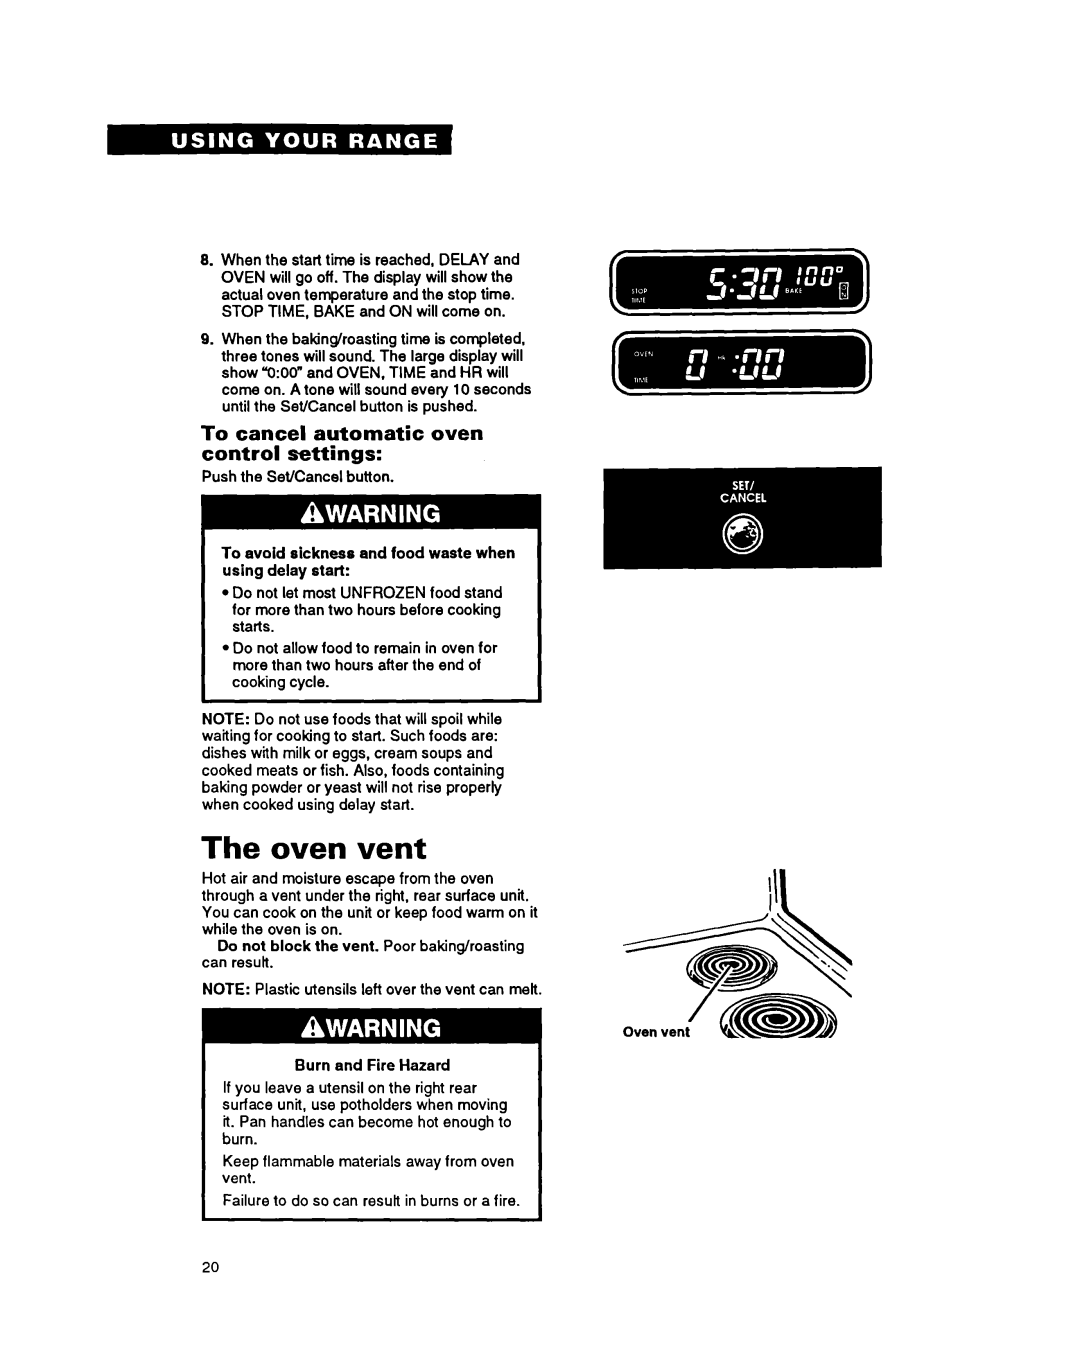 Whirlpool FES340Y important safety instructions The oven vent, To cancel automatic oven control settings 